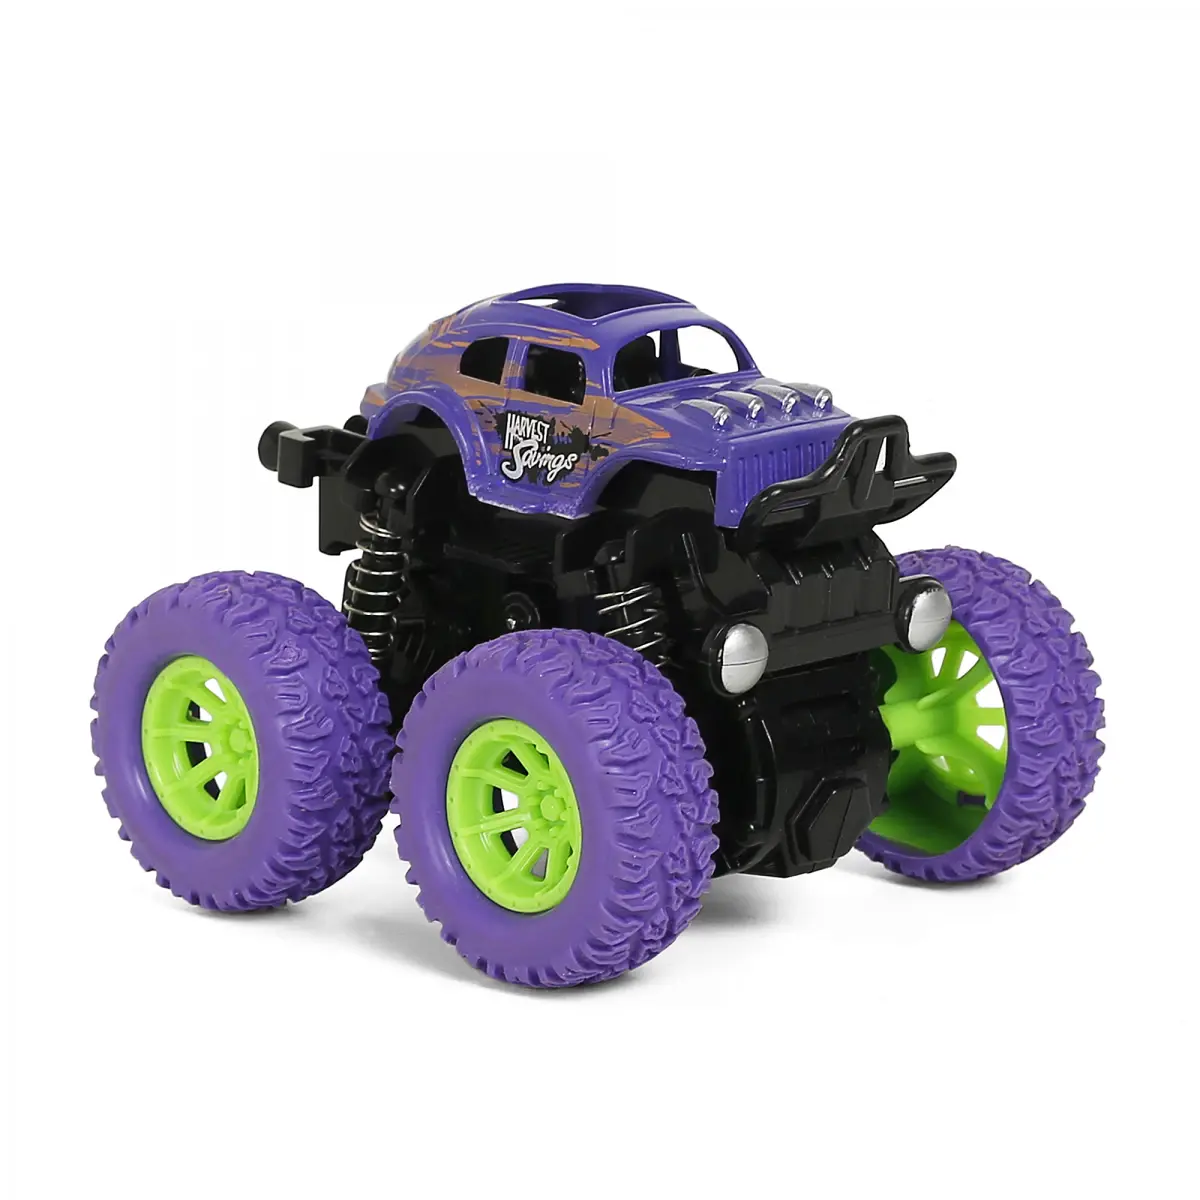 Rallyez Pull Back Monster Friction Cars Toys Truck, 3Y+, Purple